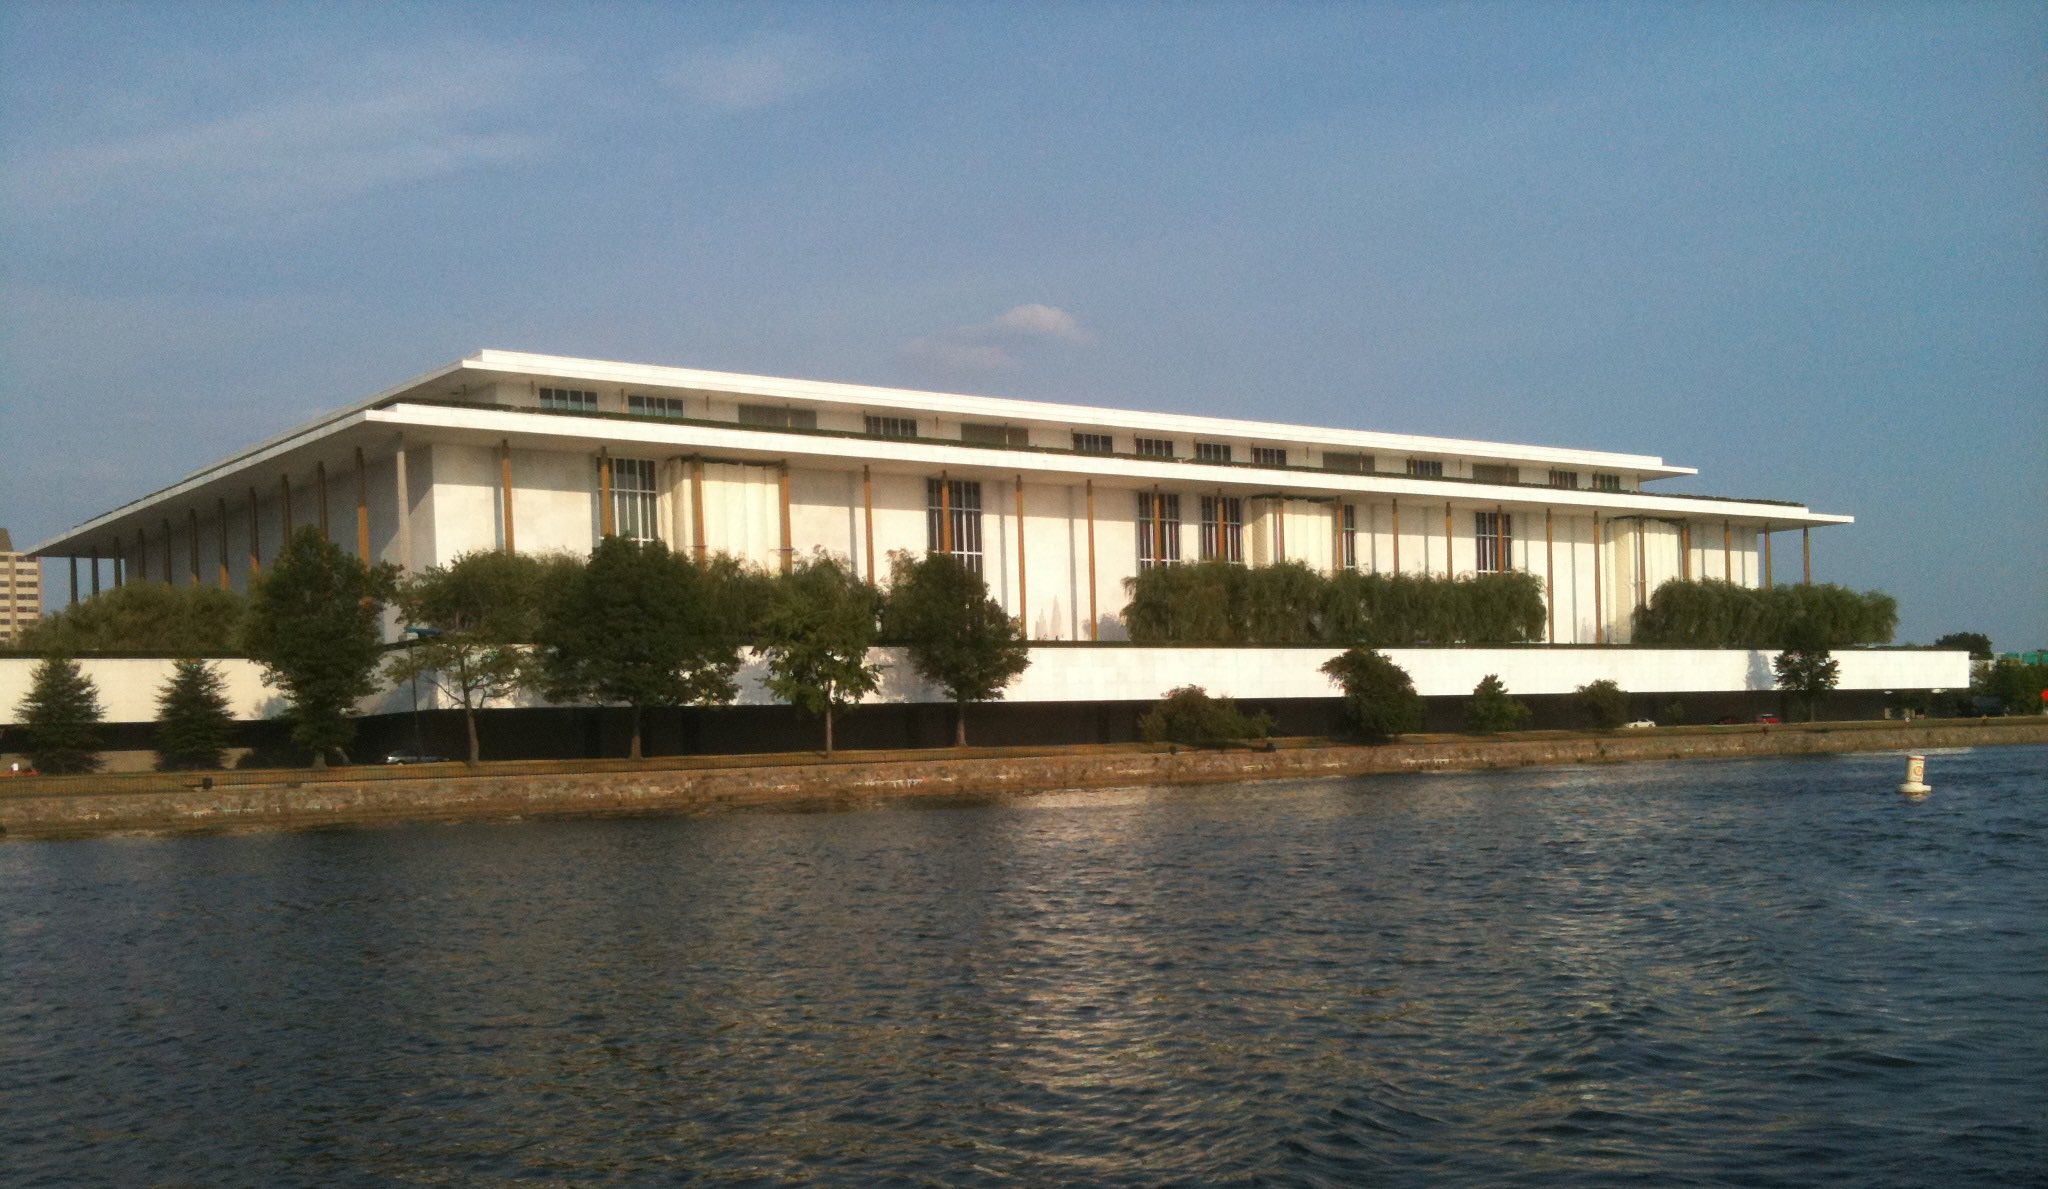 John F. Kennedy Center for the Performing Arts: Venues, architecture